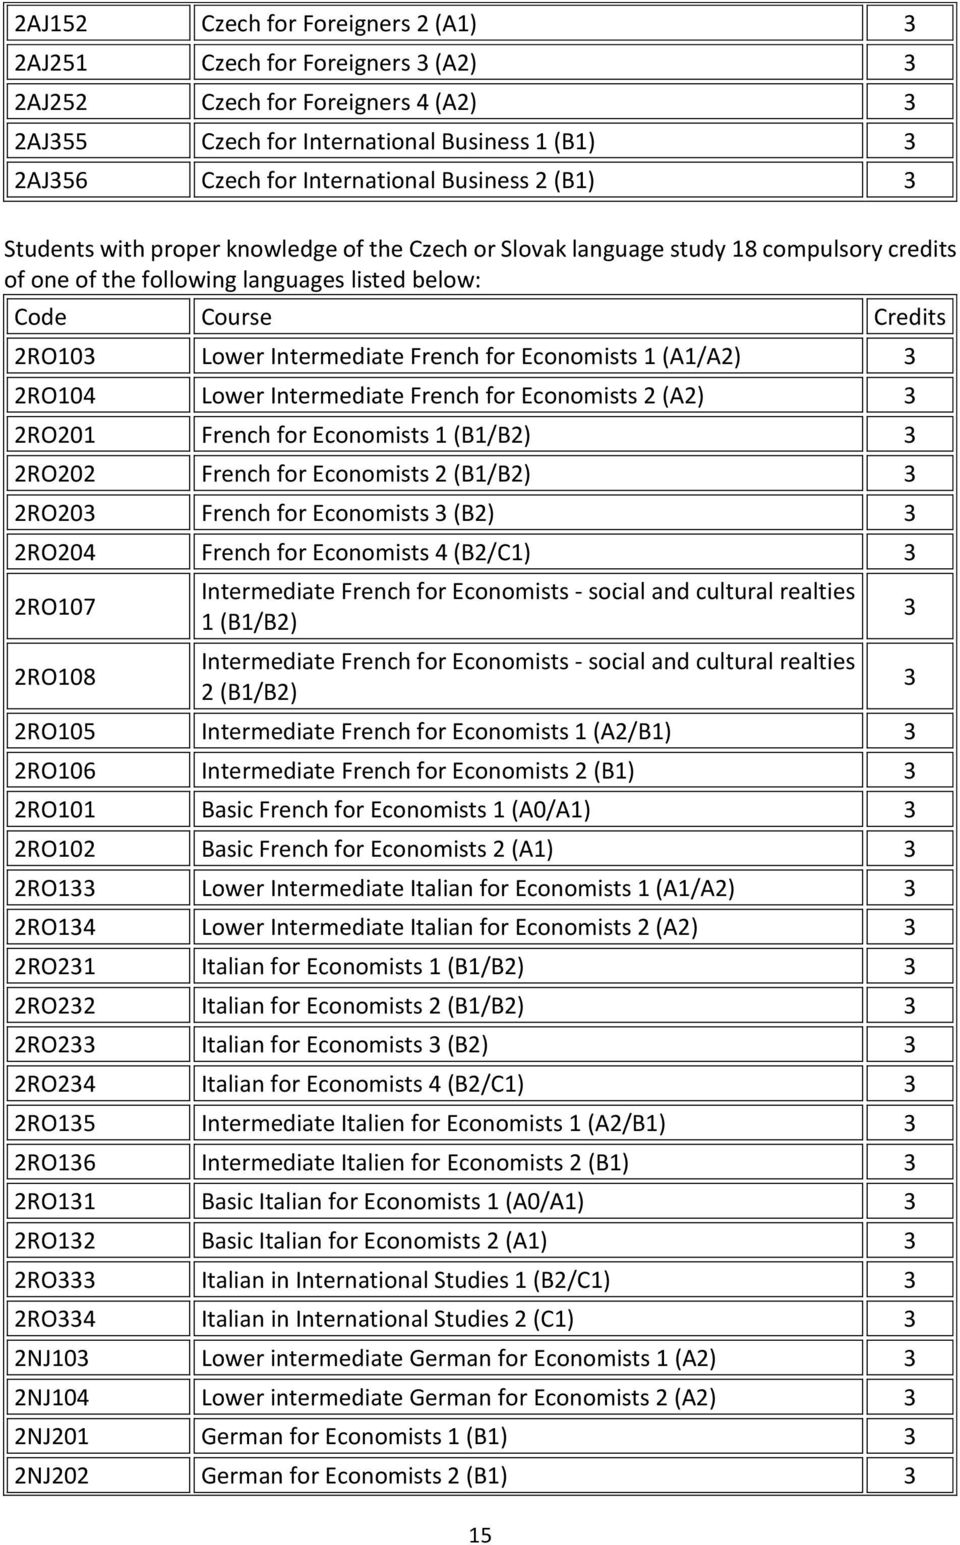 French for Economists 1 (A1/A2) 3 2RO104 Lower Intermediate French for Economists 2 (A2) 3 2RO201 French for Economists 1 (B1/B2) 3 2RO202 French for Economists 2 (B1/B2) 3 2RO203 French for